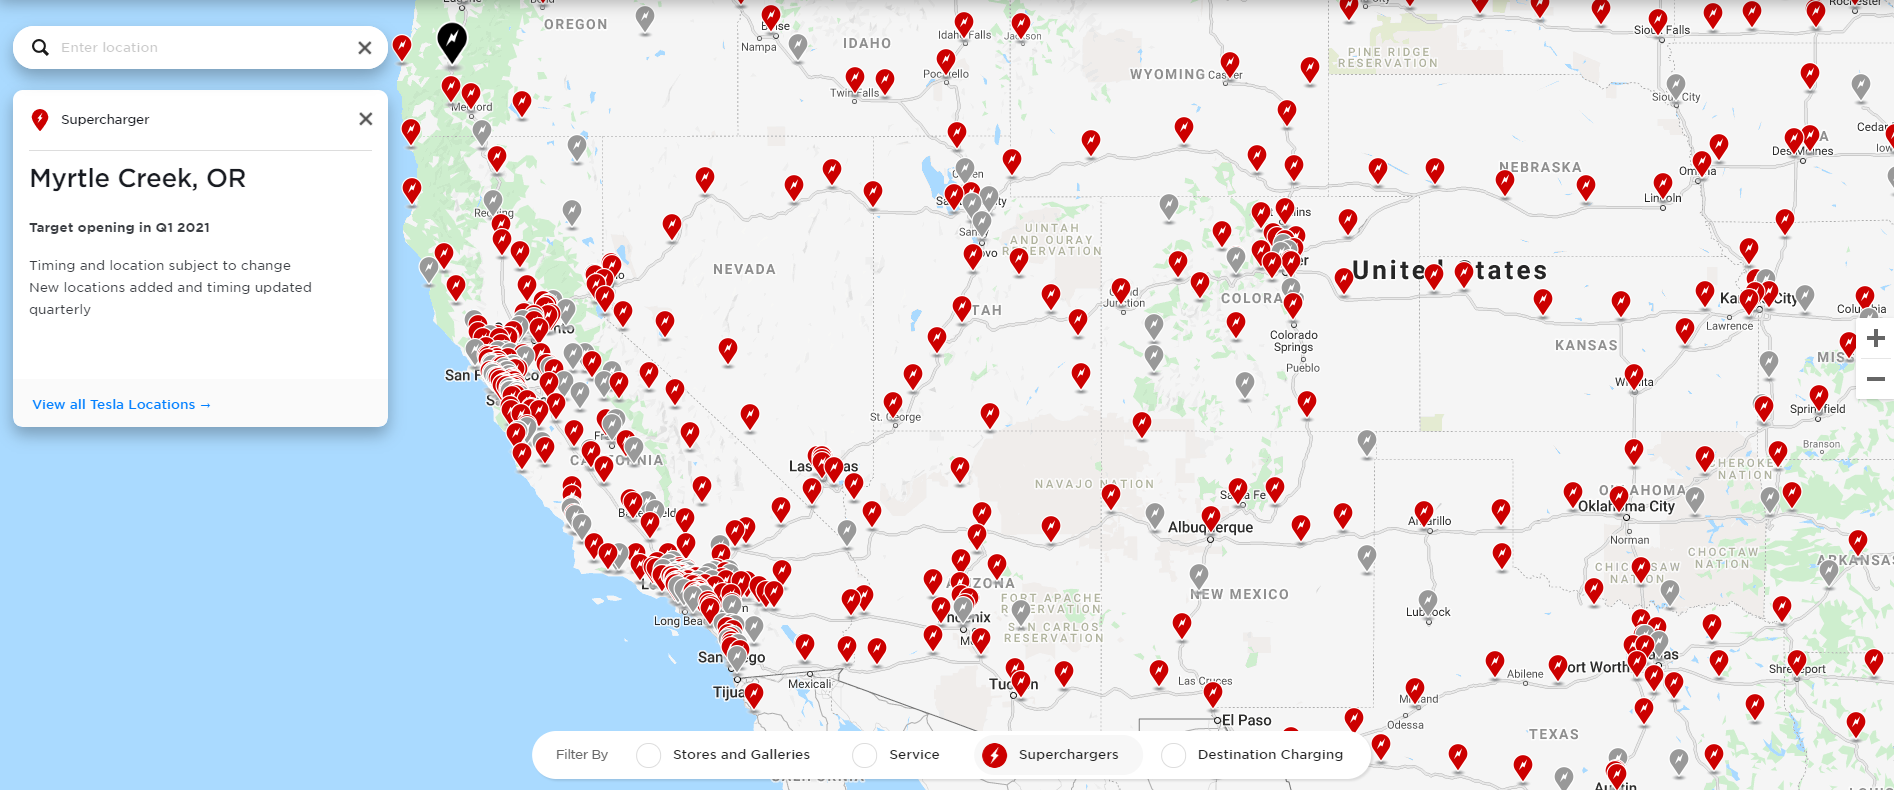 Supercharger Sites 2021.png